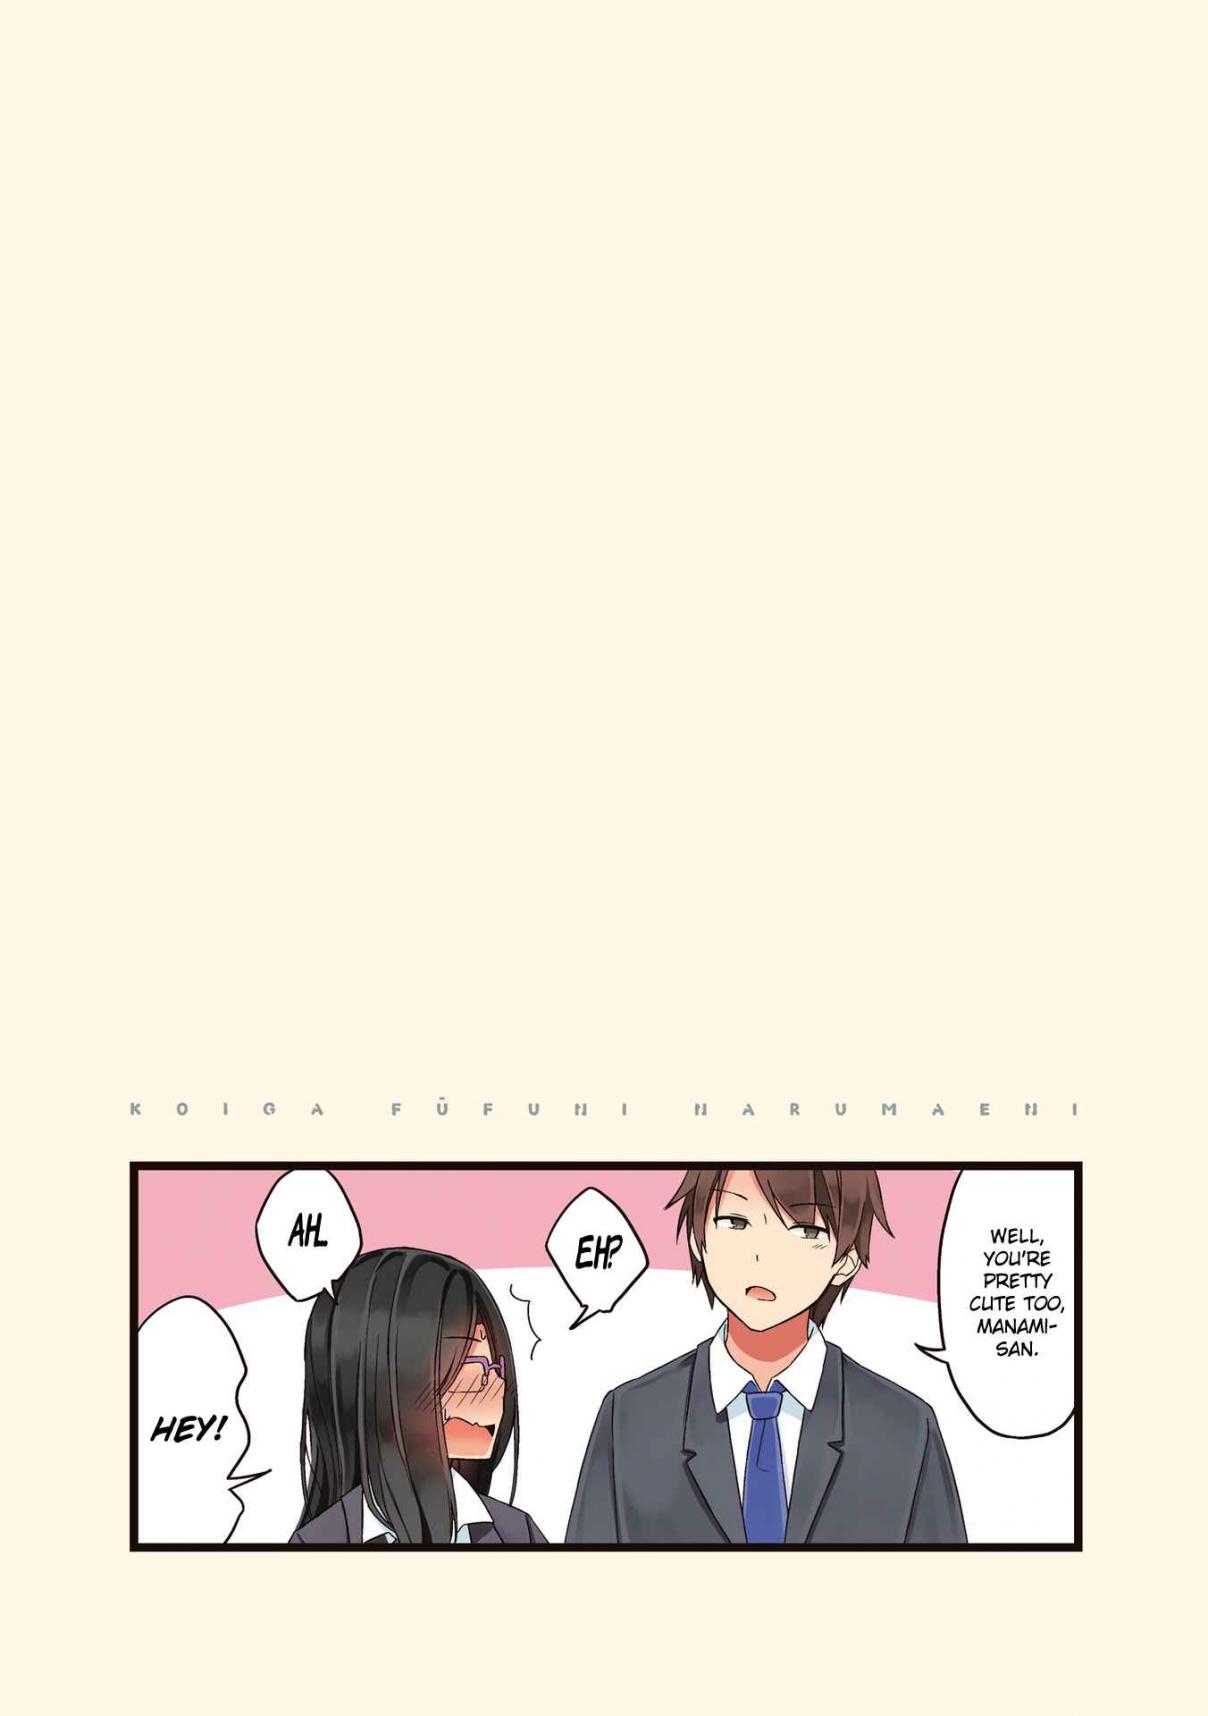 First Comes Love, Then Comes Marriage Vol. 1 Ch. 8 Being Called His Wife for the First Time